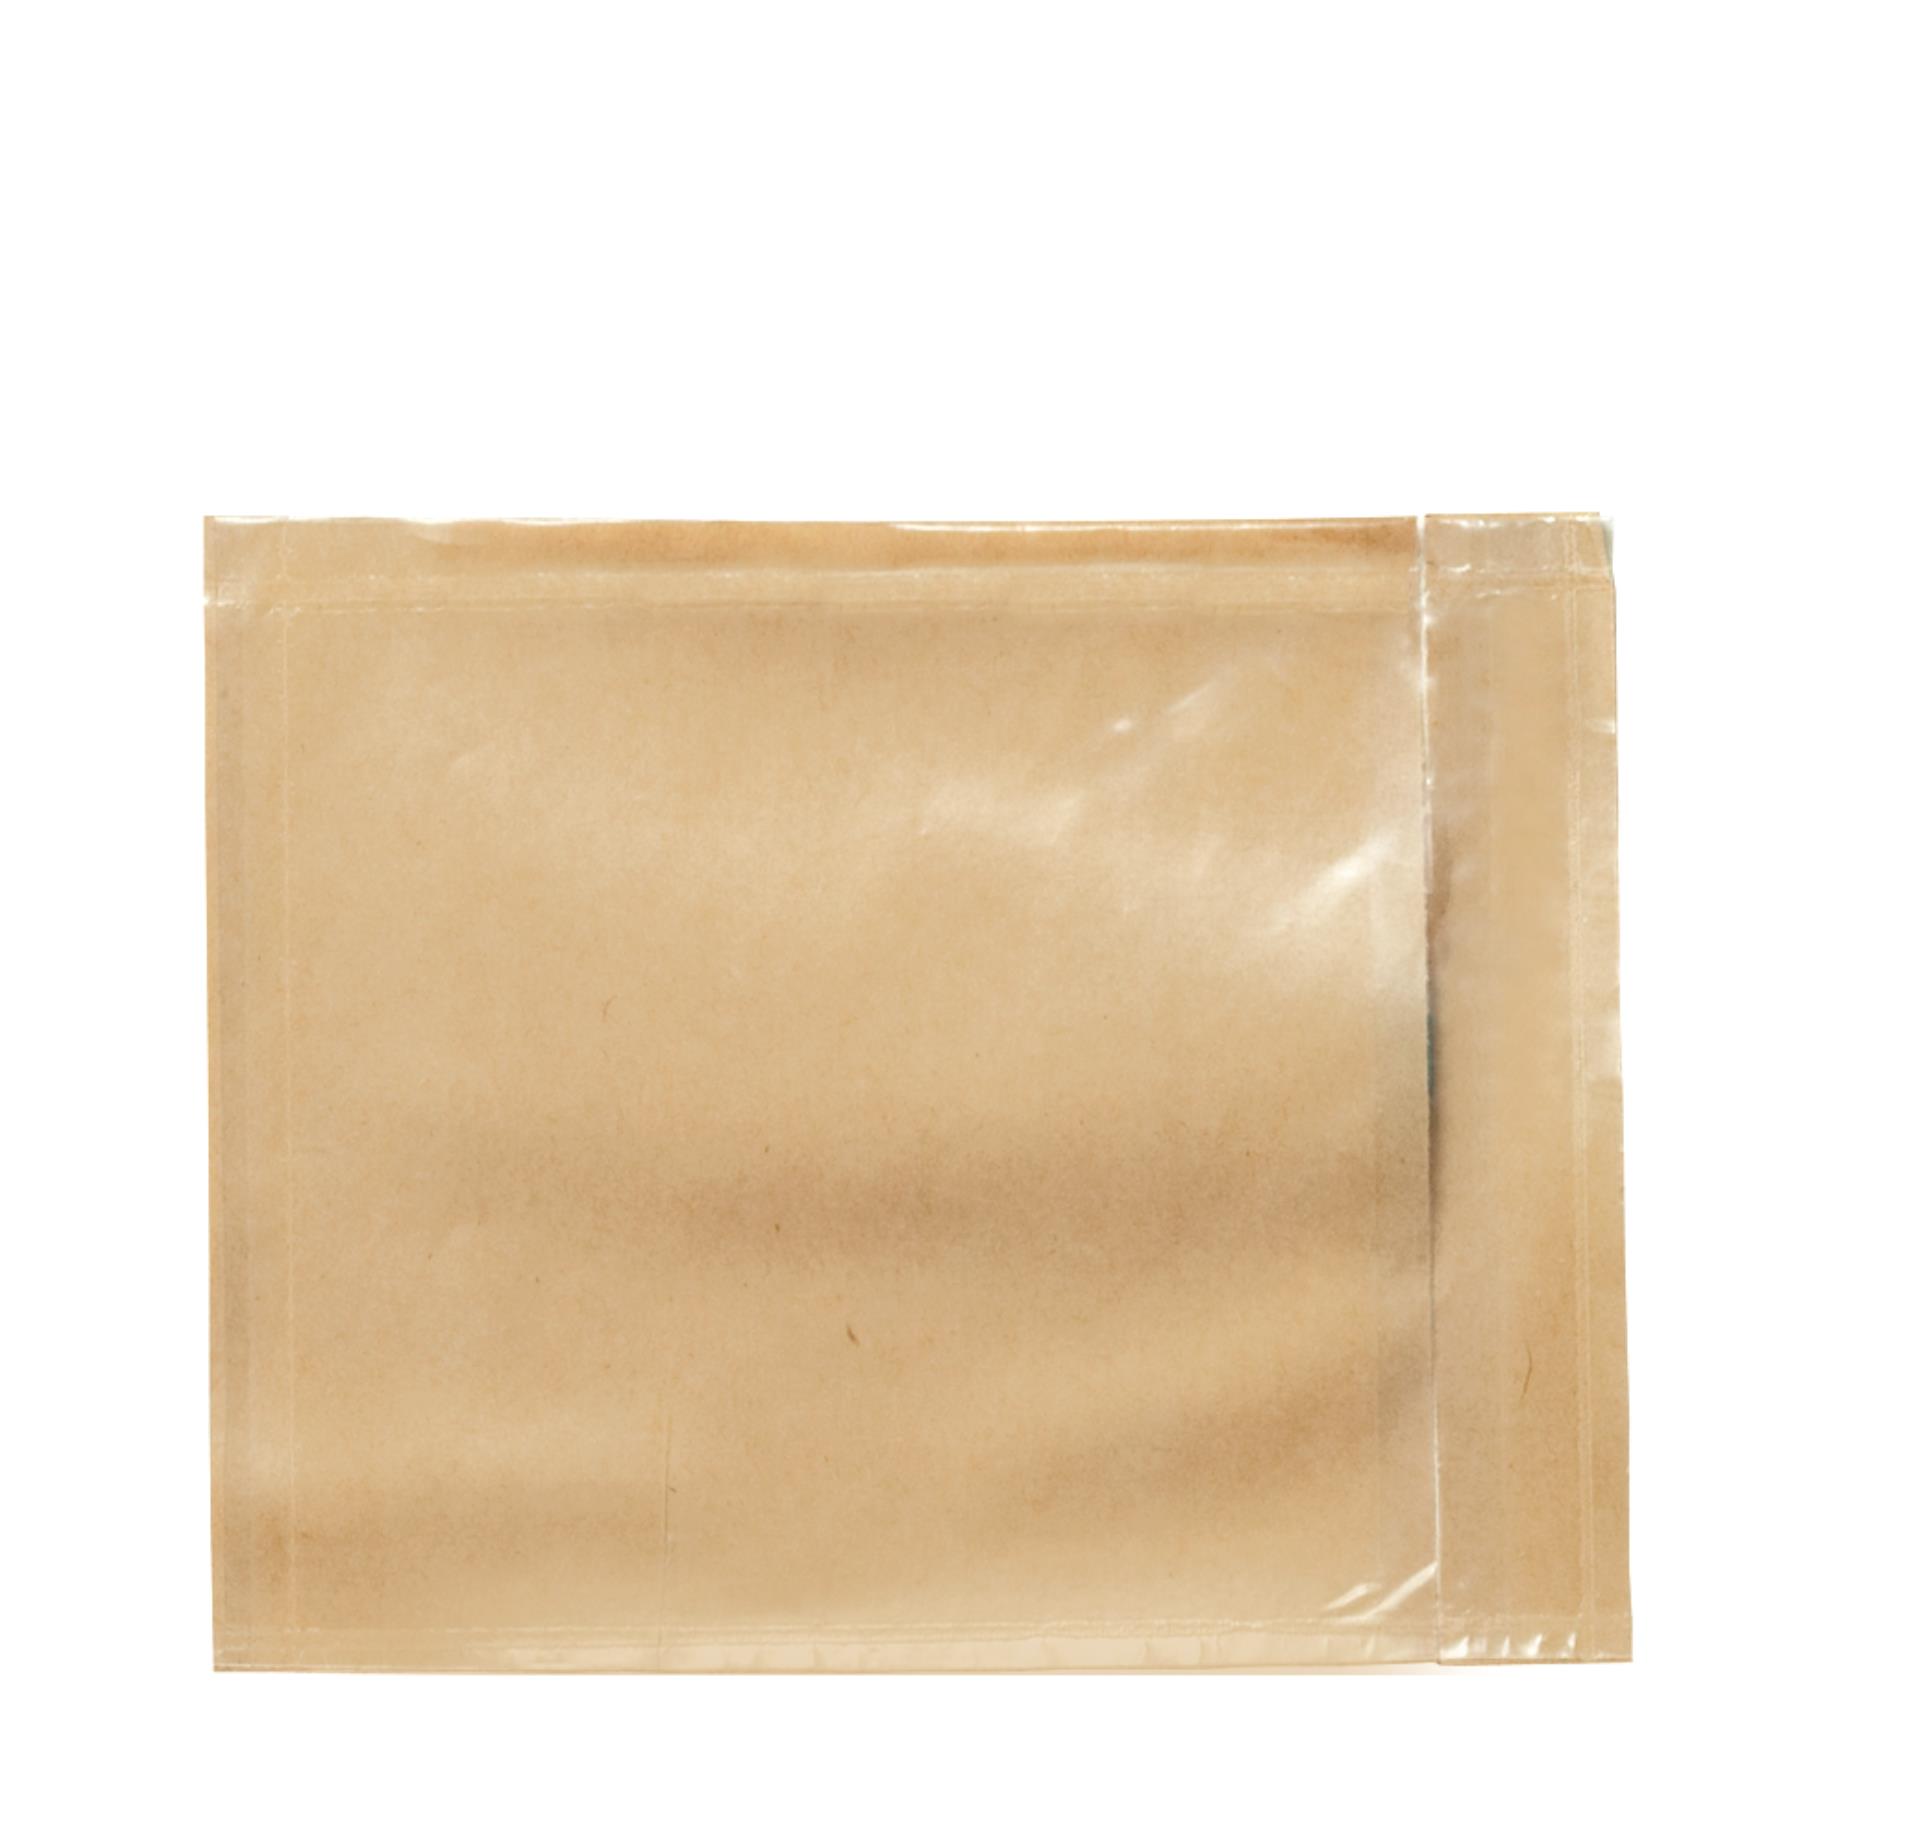 3M™ Non-Printed Packing List Envelope NP1, 4-1/2 in x 5-1/2 in, 1000 per  case Aircraft 9393794